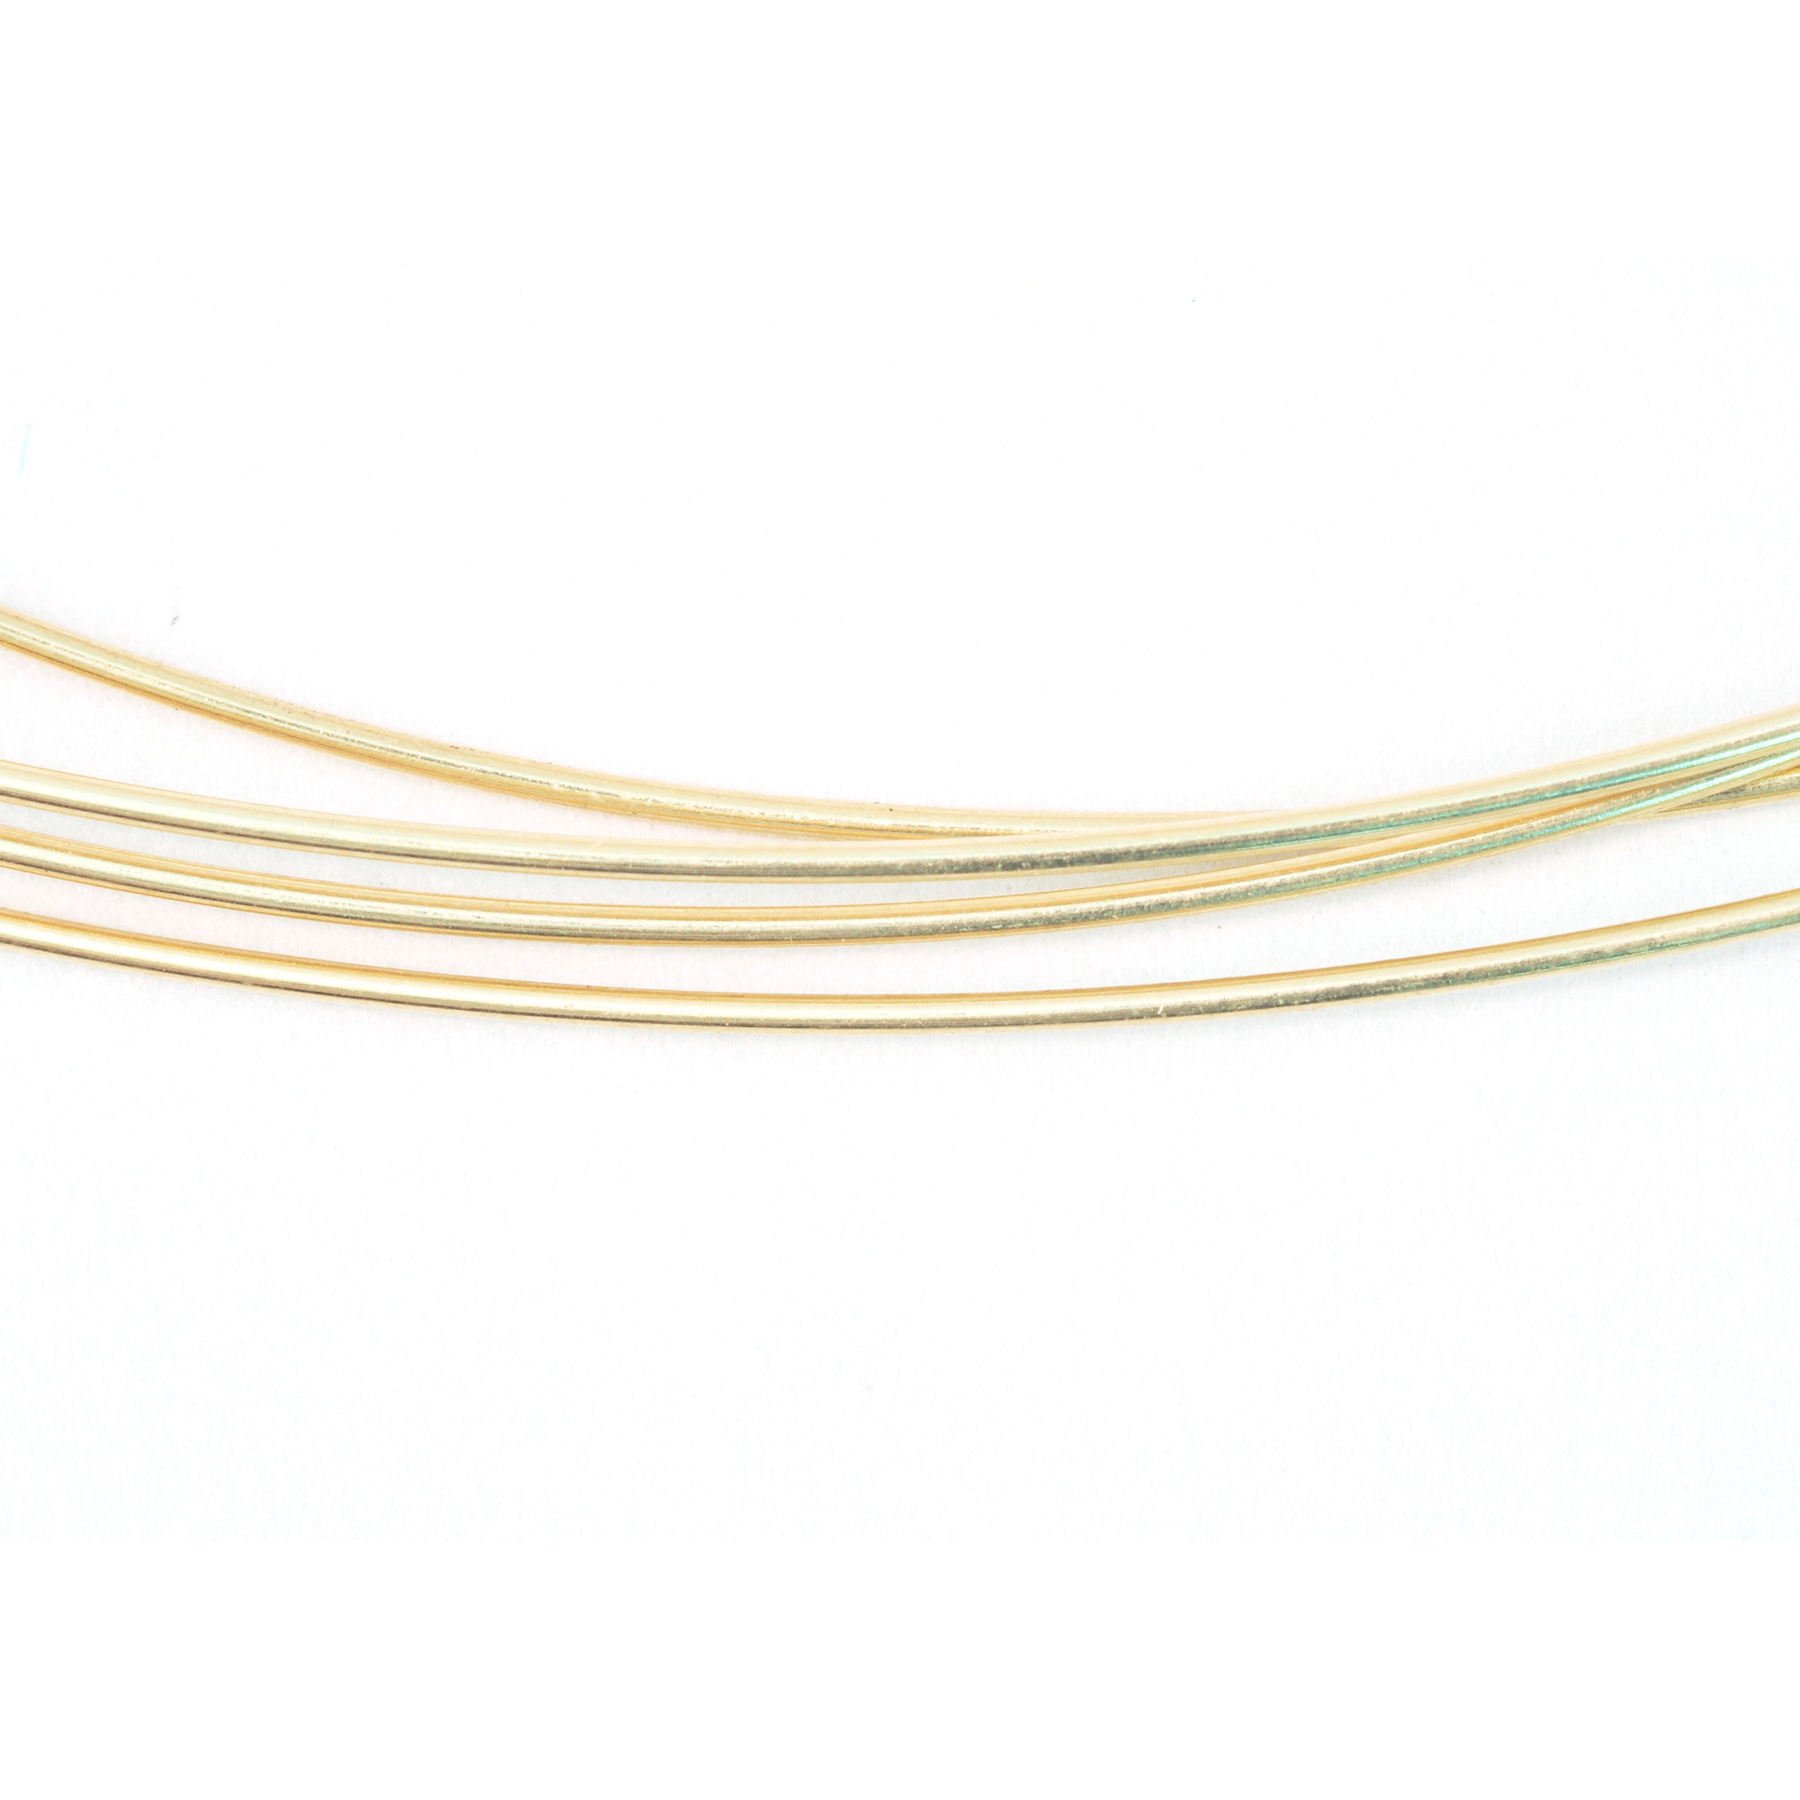 6 Inches Solder Wire 14K Plumb Yellow Gold Easy 22 Gauge Cadmium-Free by Craft Wire